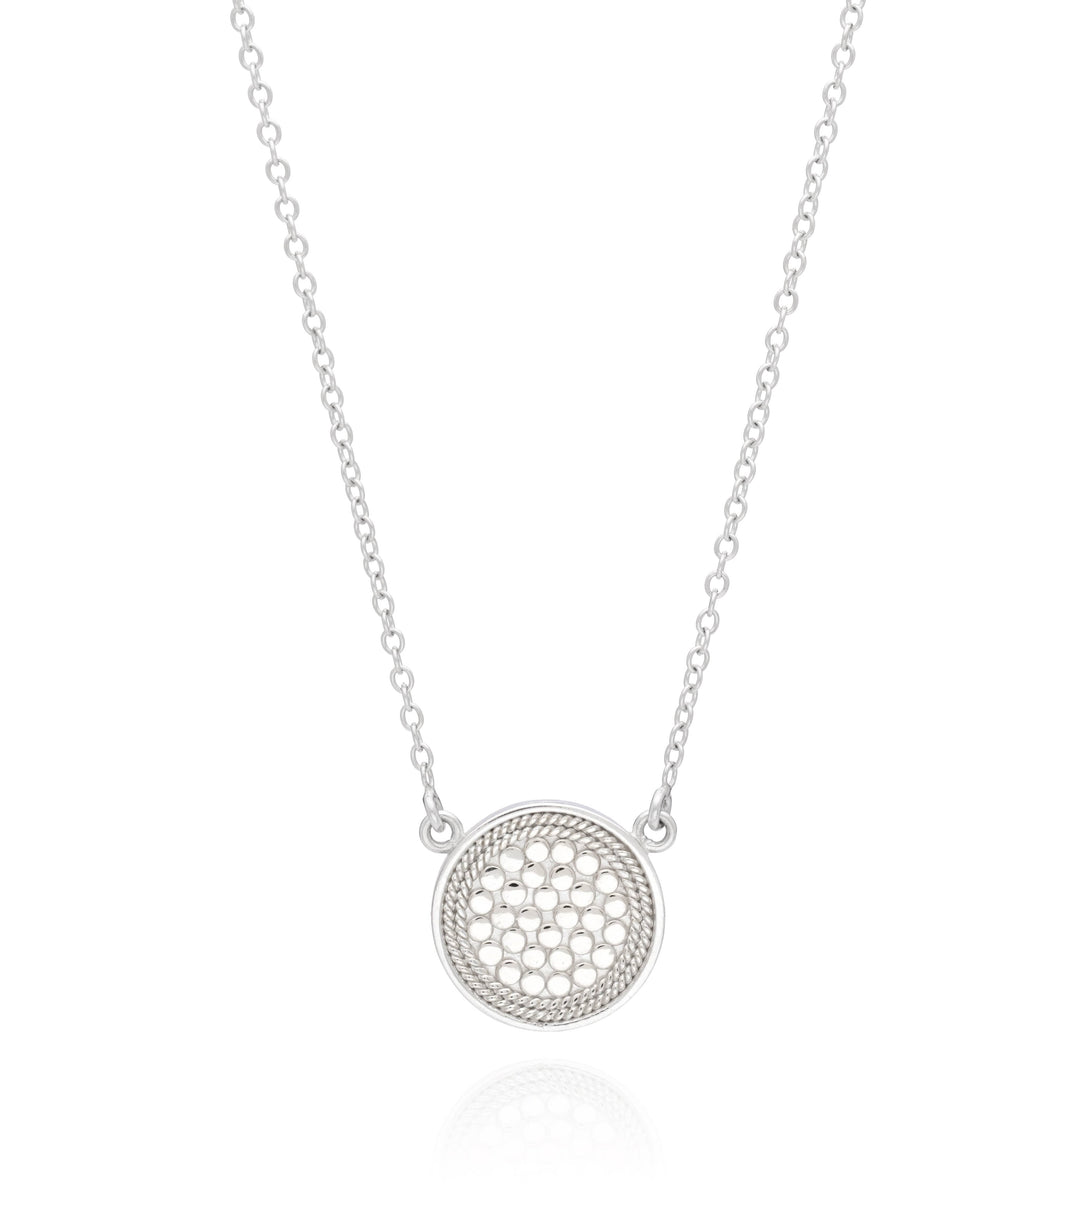 Anna Beck | Classic Disc Necklace